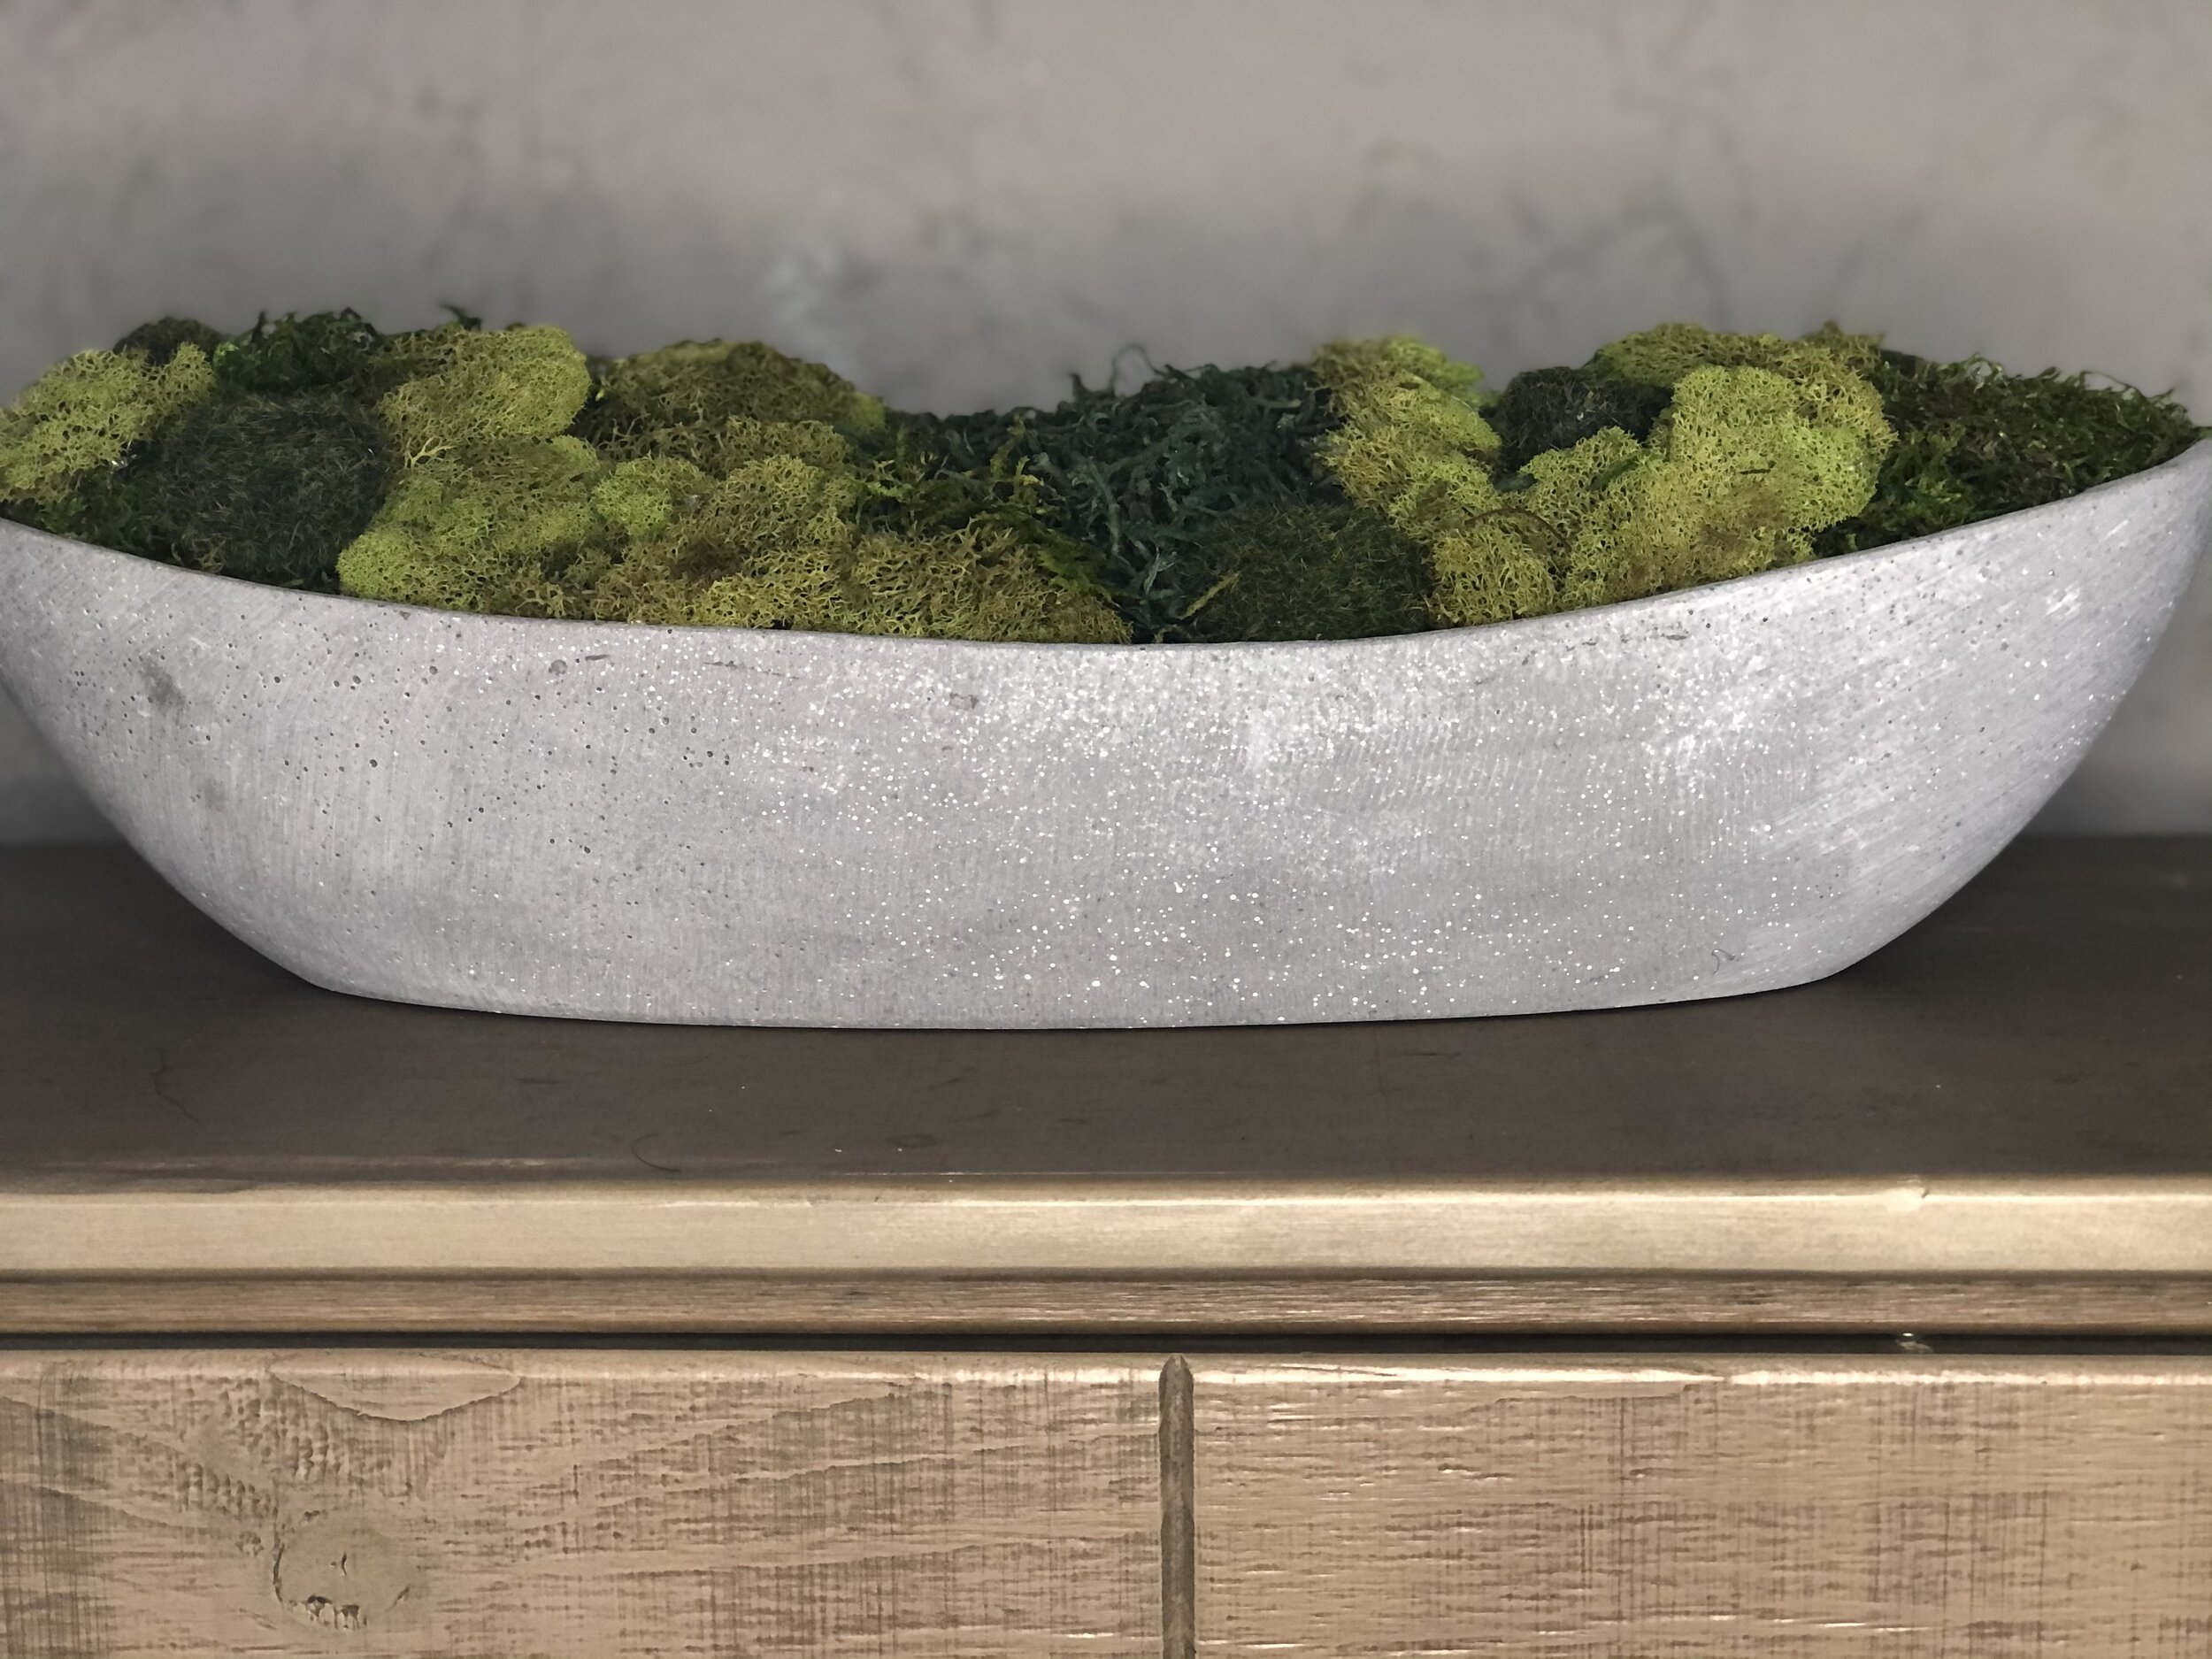 The Chic DIYer - RH Inspired Moss Bowl — On Avenue B